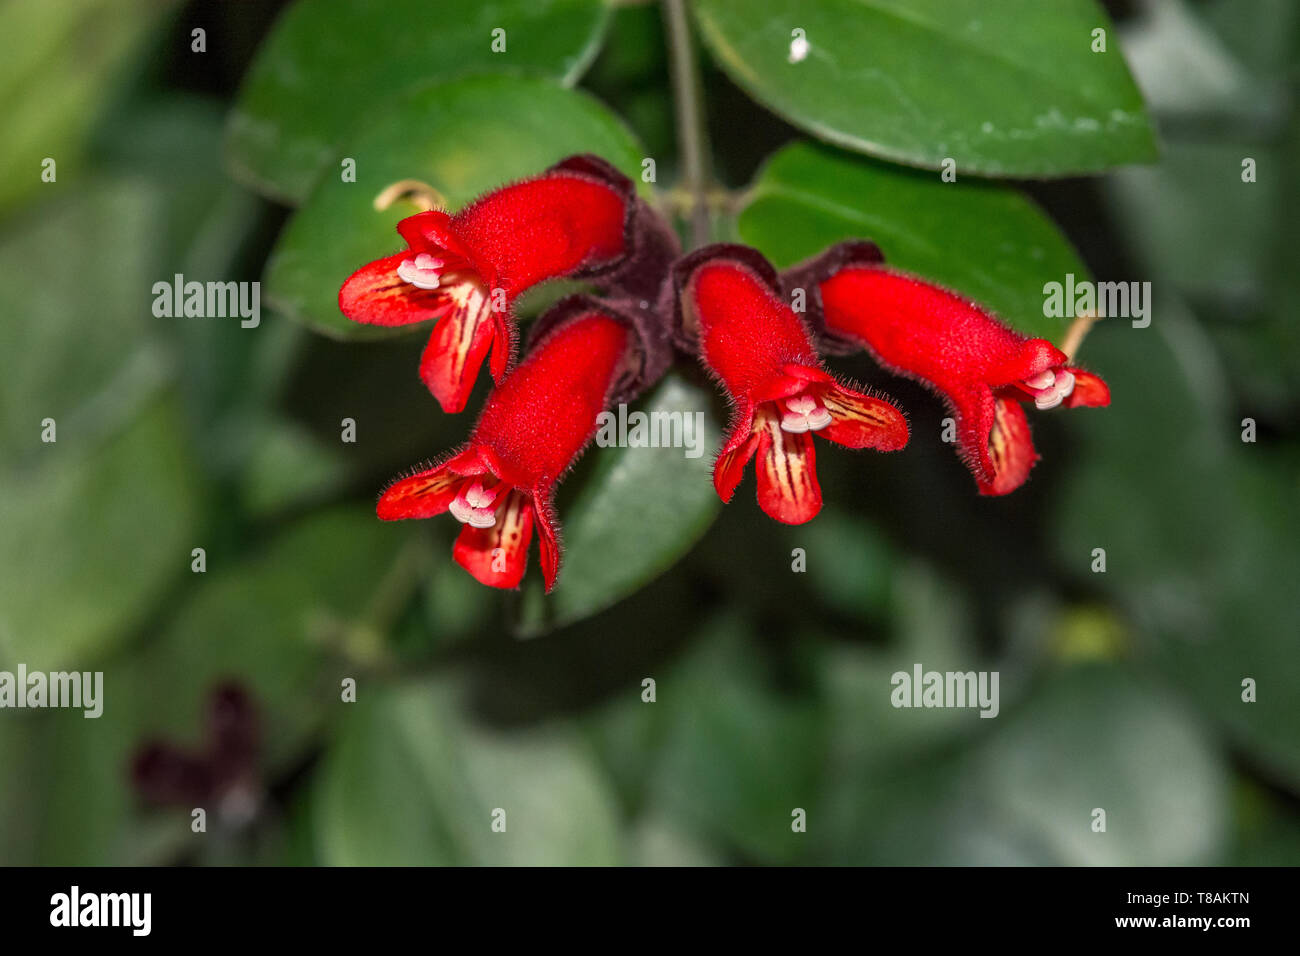 Macro View of Aeschynanthus Radicans, also known as Lipstick Plant, at Montreal Botanical Garden, Quebec, Canada. Stock Photo